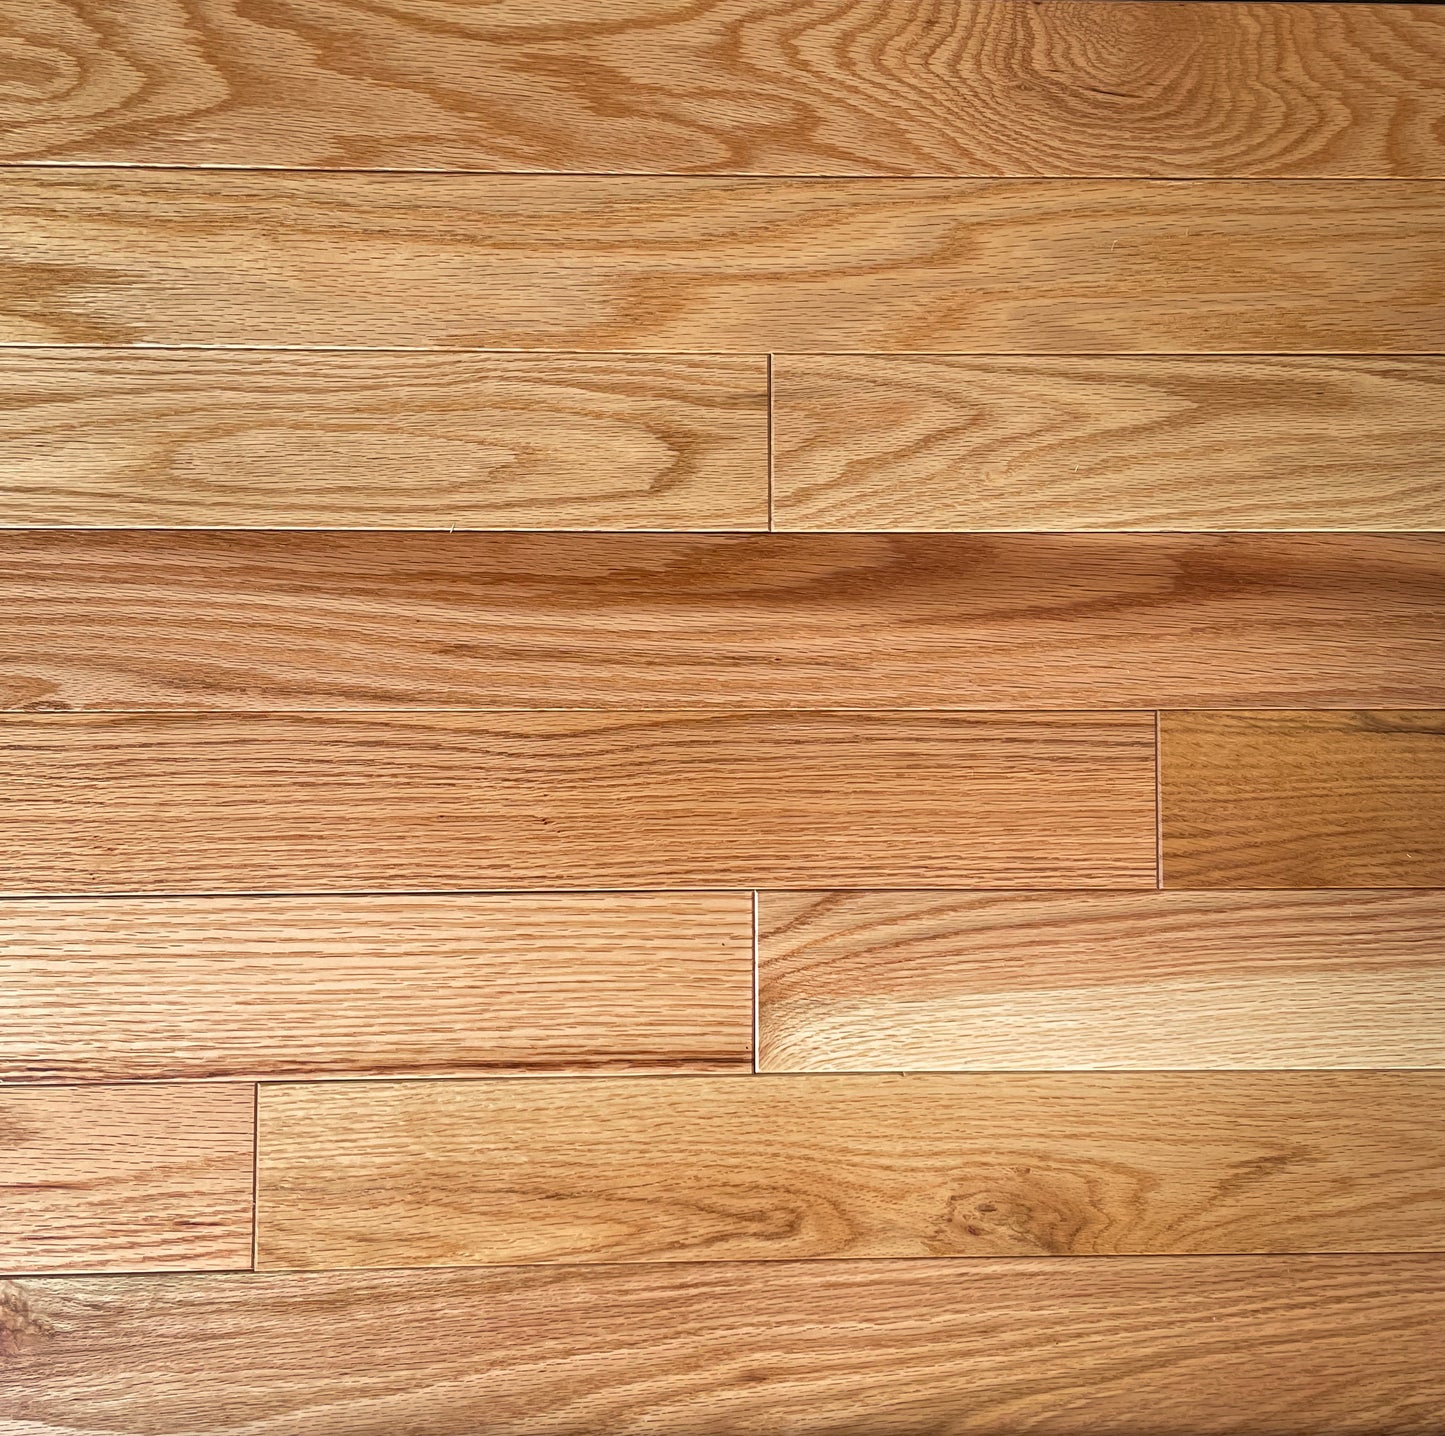 2 1/4 x 3/4" Solid Red Oak Natural Stain Prefinished Hardwood Flooring